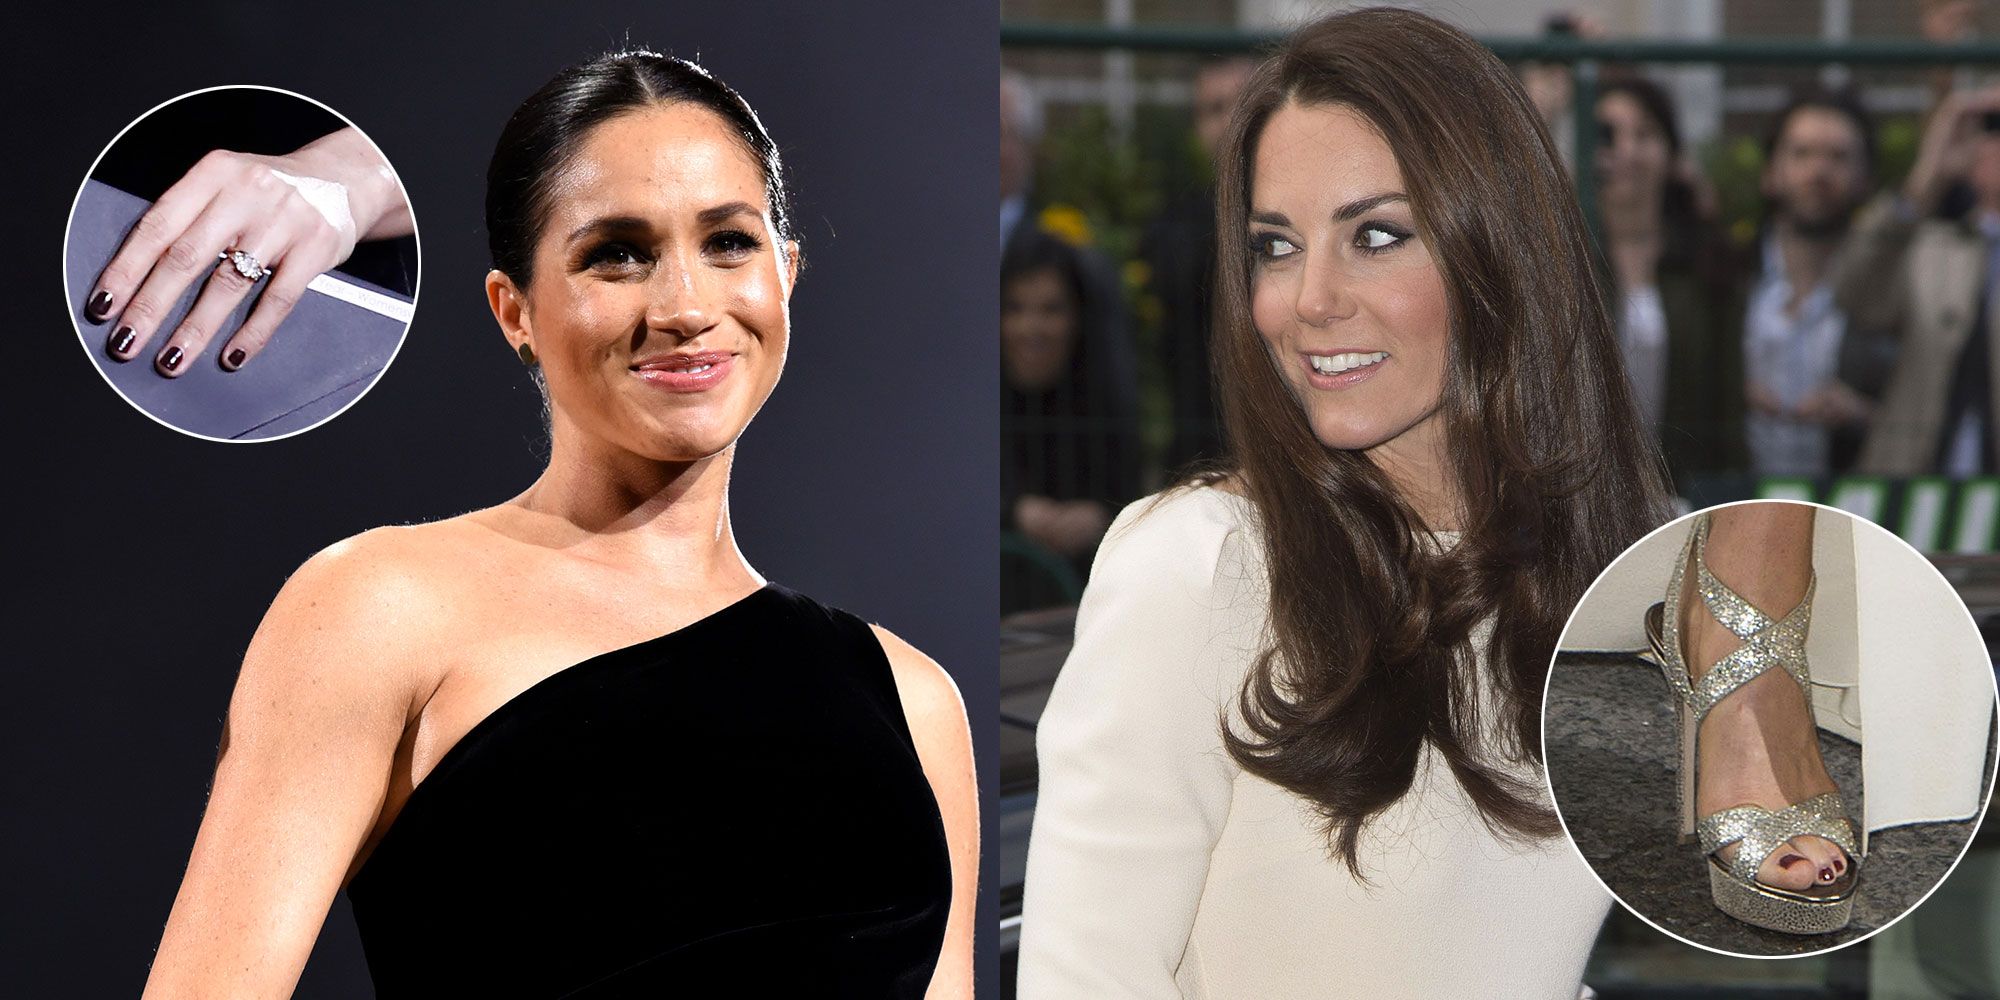 Meghan Markle And Kate Middleton Said To Be Breaking Protocol With Dark Nail Polish